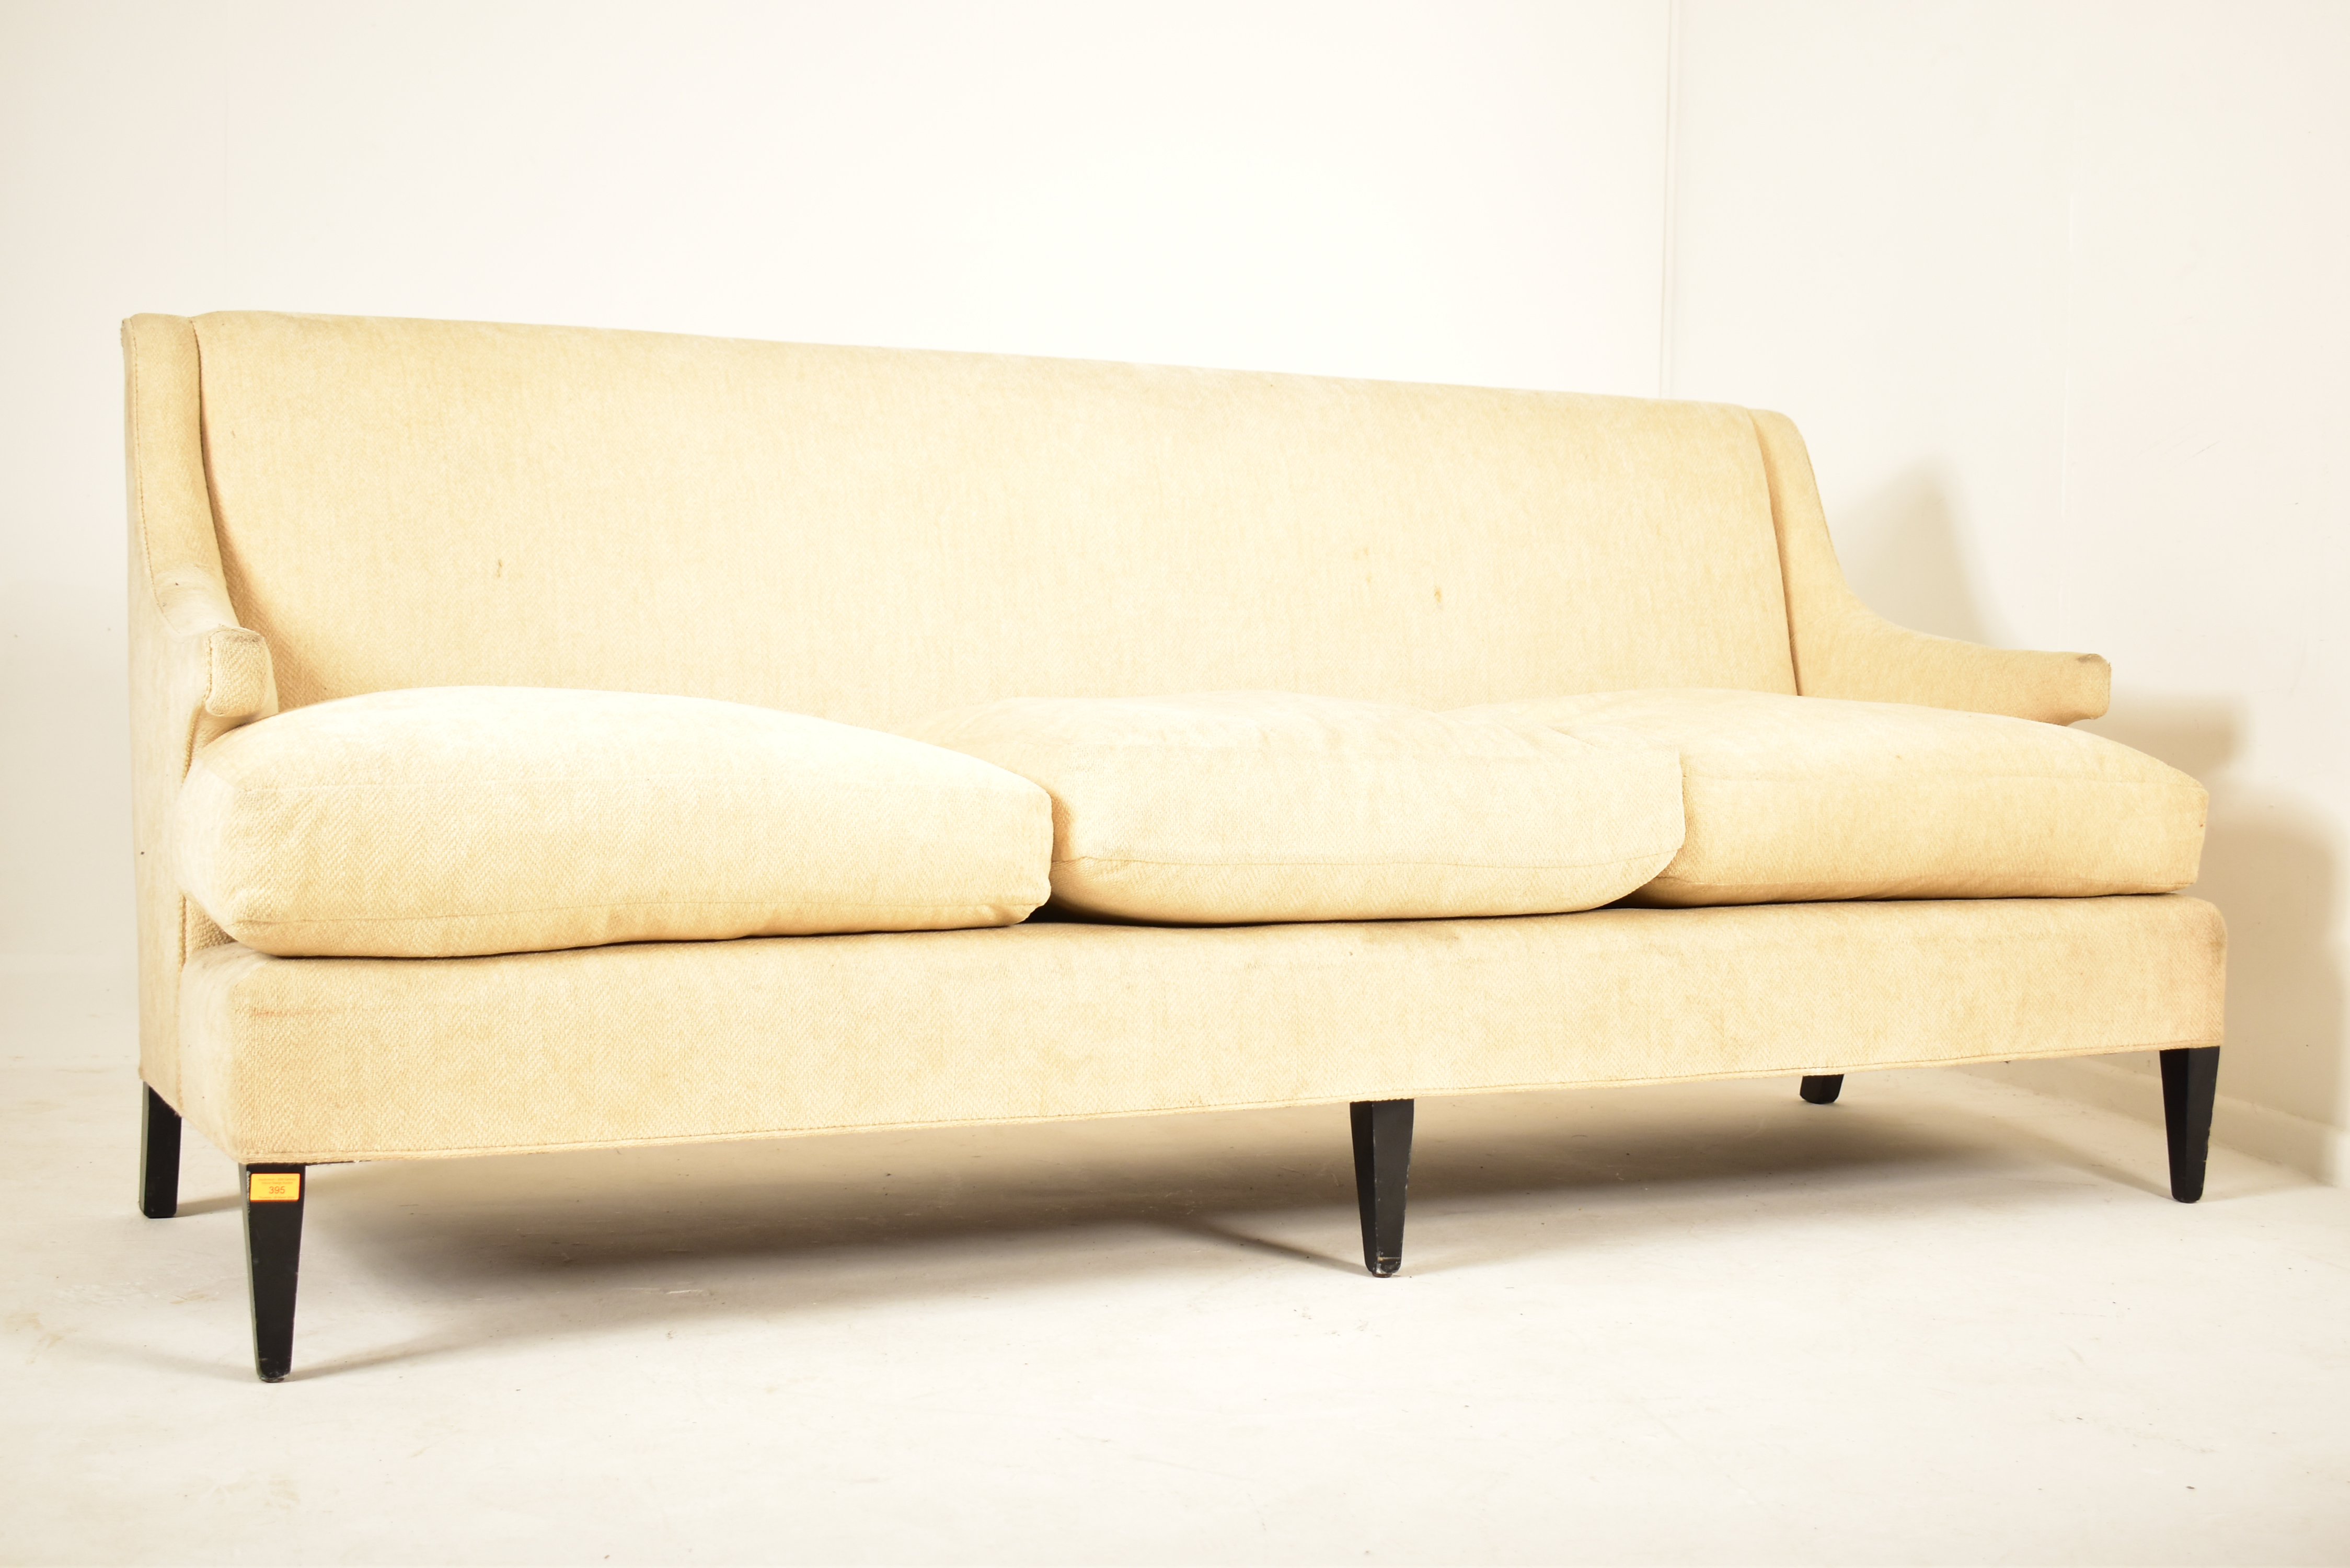 LARGE 20TH CENTURY SOFA IN THE MANNER OF GEORGE SMITH - Image 8 of 8